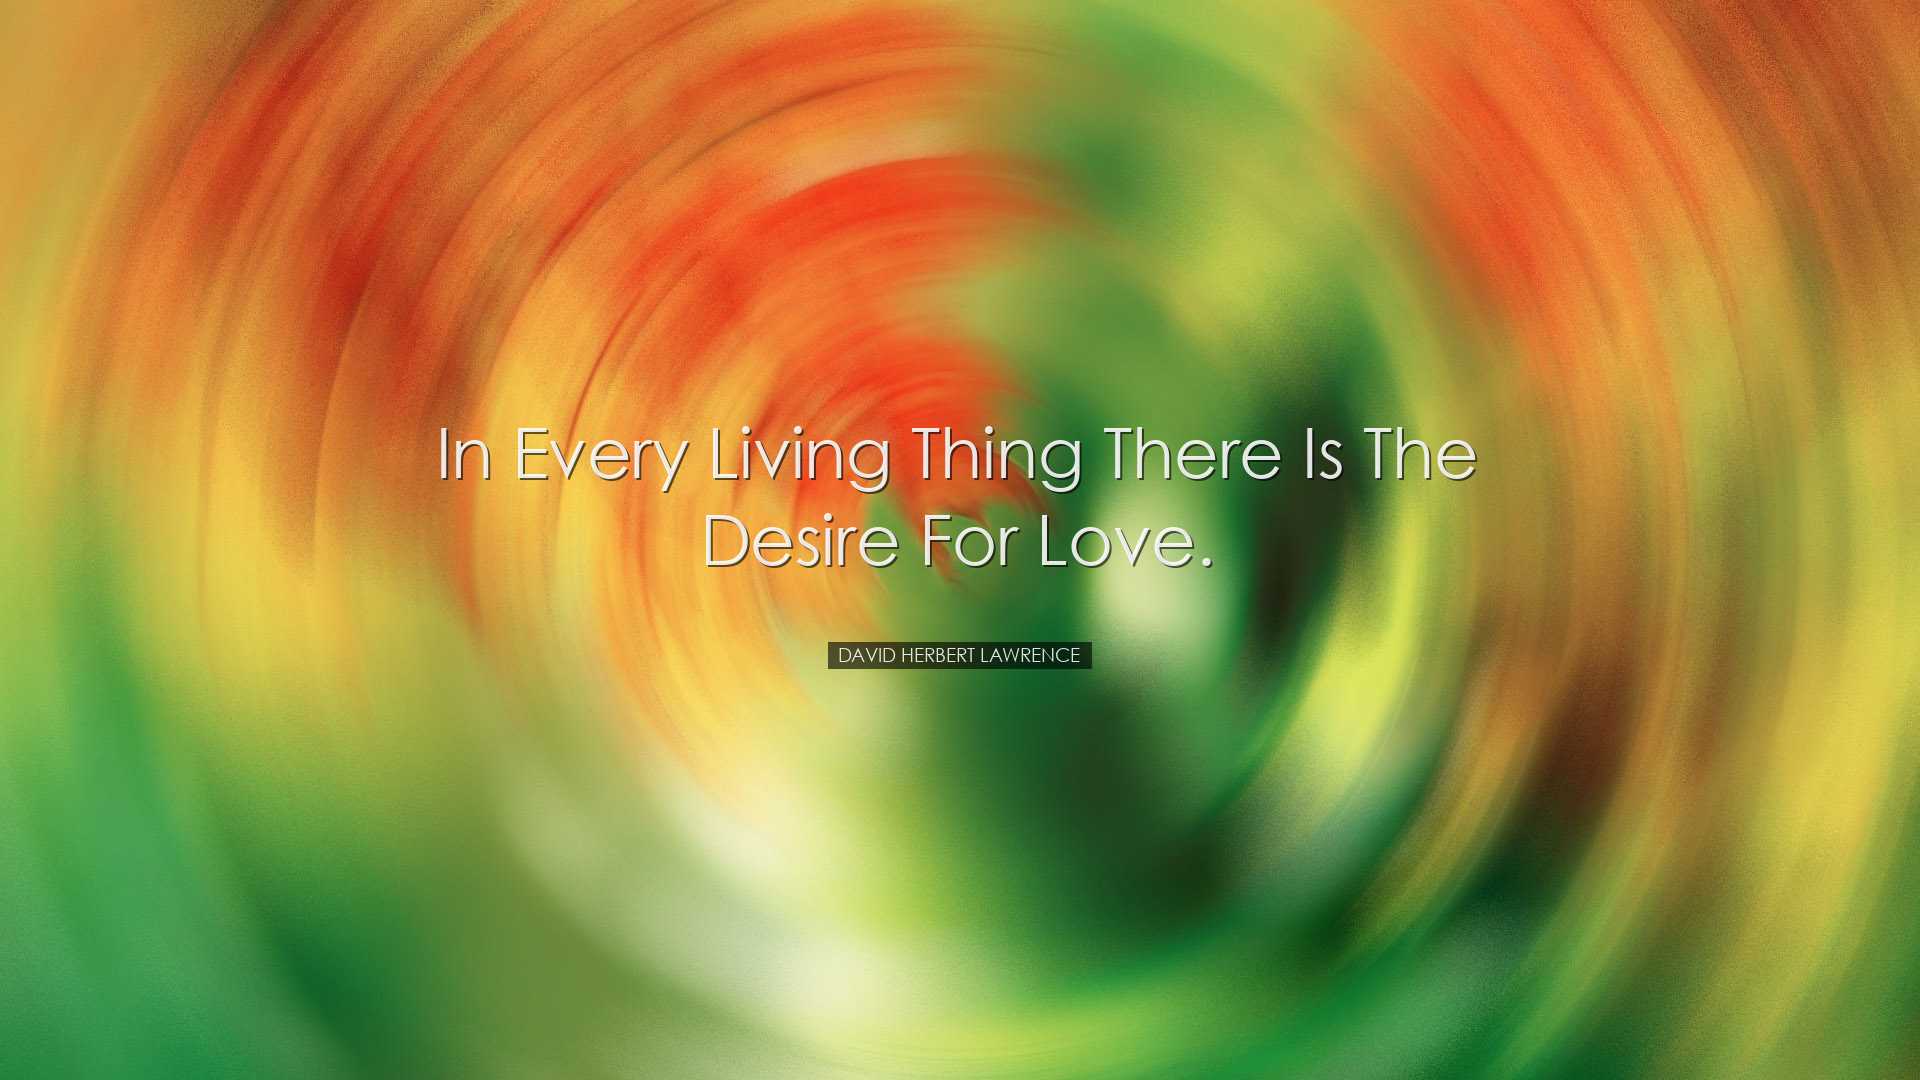 In every living thing there is the desire for love. - David Herber